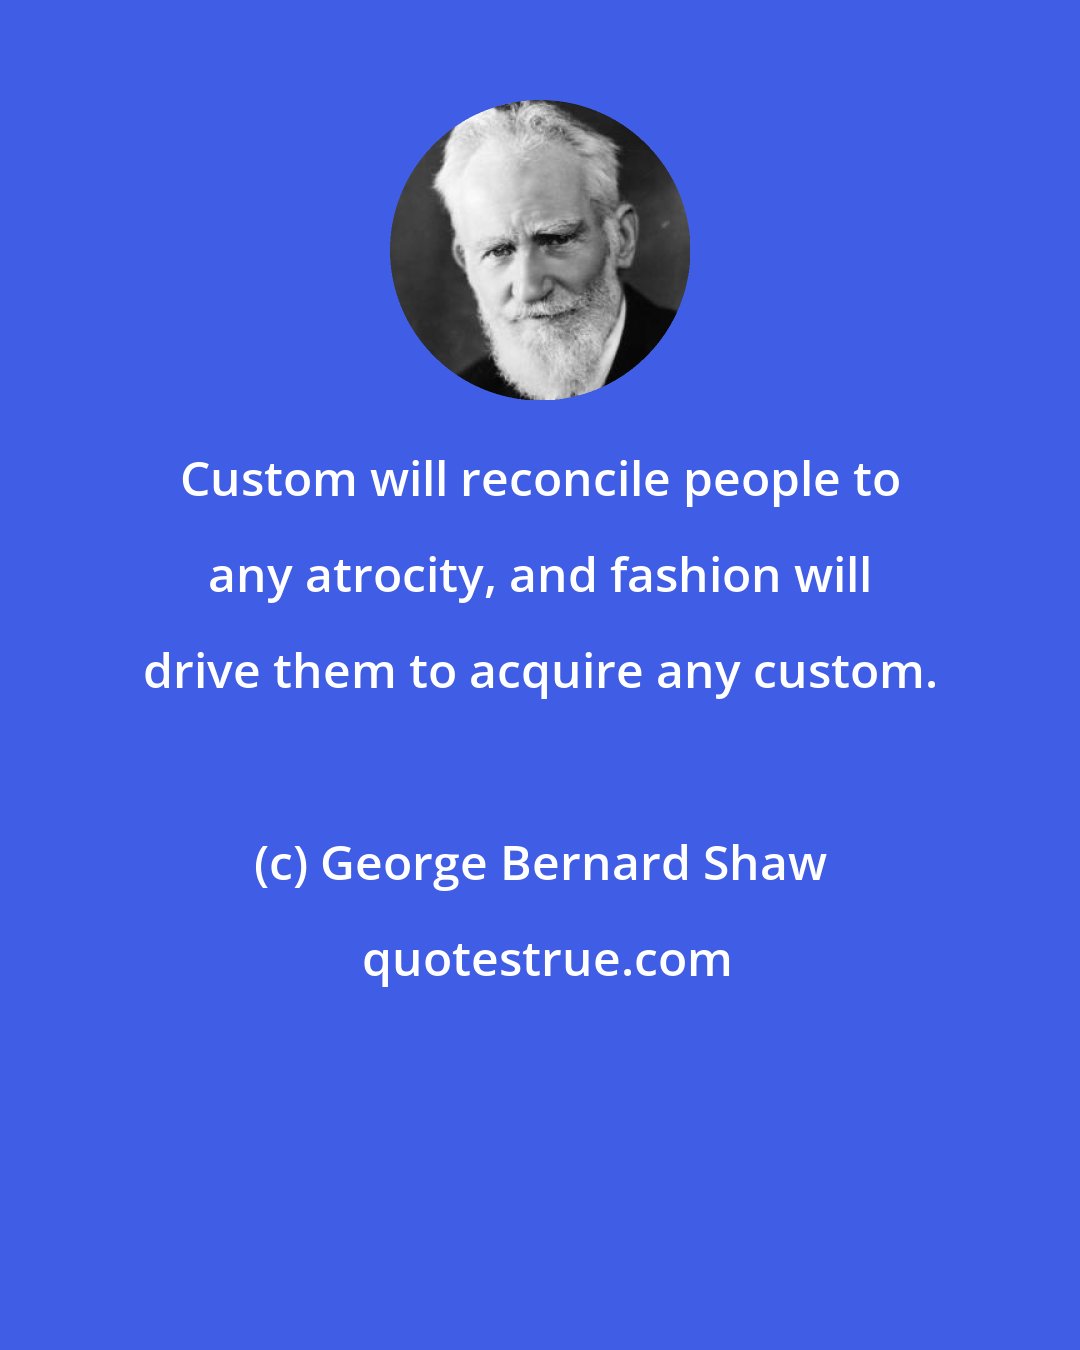 George Bernard Shaw: Custom will reconcile people to any atrocity, and fashion will drive them to acquire any custom.